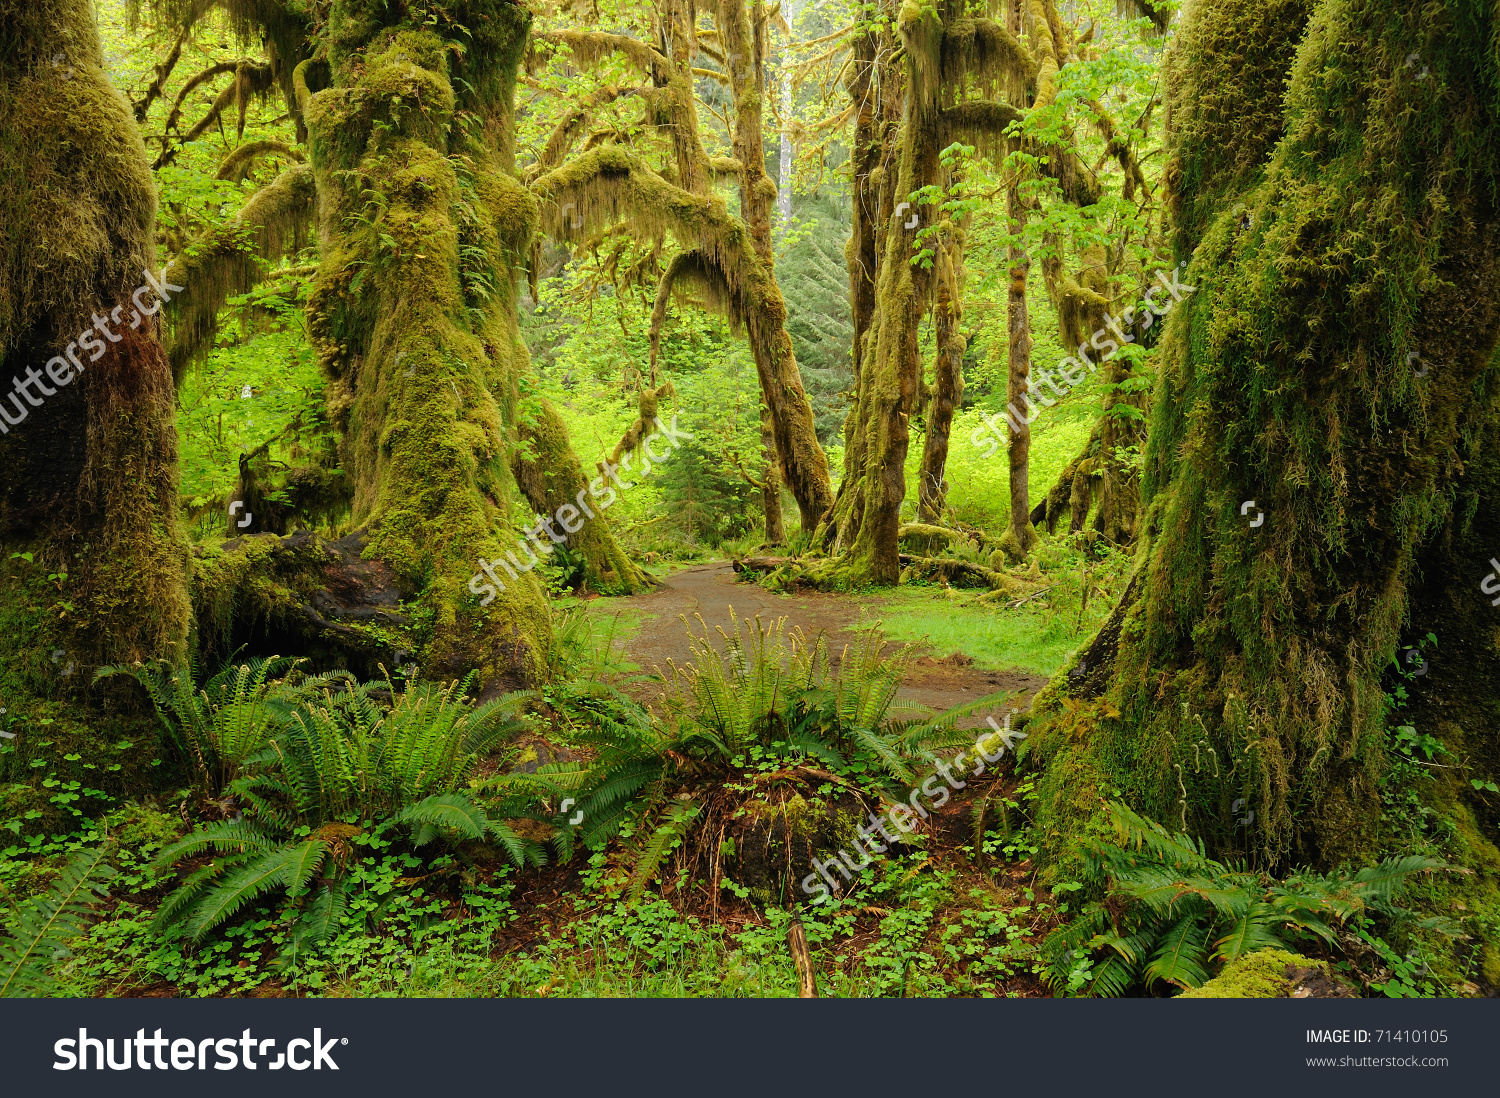 Olympic National Park clipart #1, Download drawings